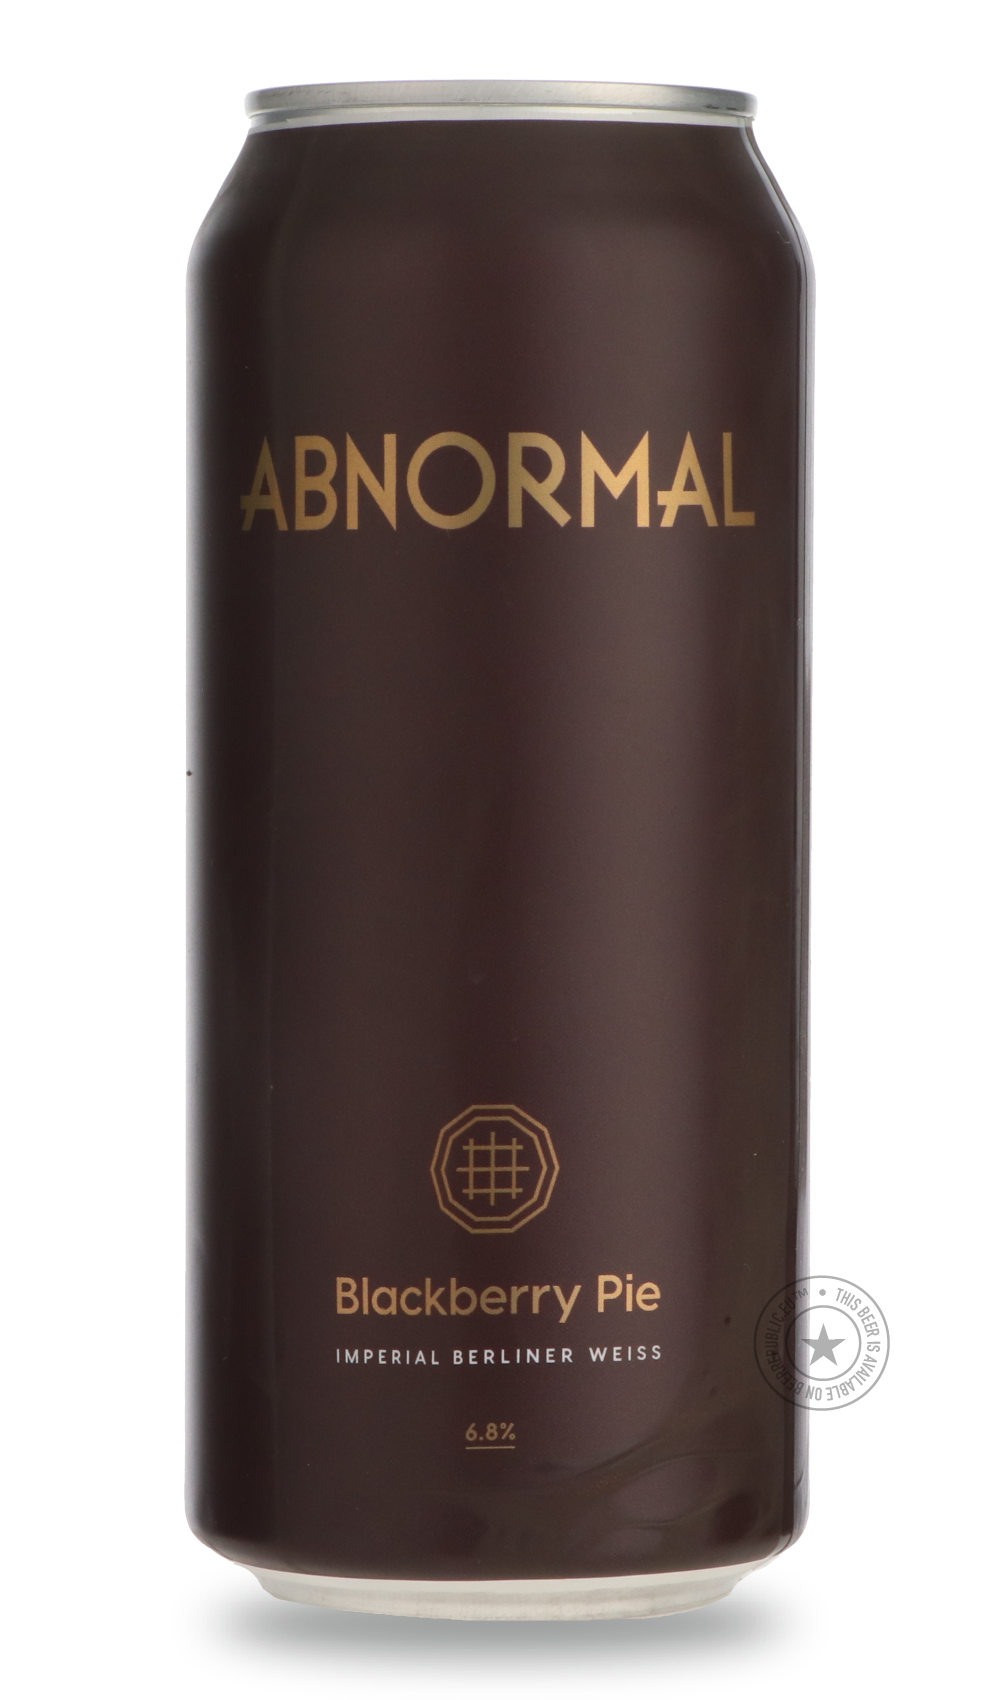 -Abnormal- Blackberry Pie-Sour / Wild & Fruity- Only @ Beer Republic - The best online beer store for American & Canadian craft beer - Buy beer online from the USA and Canada - Bier online kopen - Amerikaans bier kopen - Craft beer store - Craft beer kopen - Amerikanisch bier kaufen - Bier online kaufen - Acheter biere online - IPA - Stout - Porter - New England IPA - Hazy IPA - Imperial Stout - Barrel Aged - Barrel Aged Imperial Stout - Brown - Dark beer - Blond - Blonde - Pilsner - Lager - Wheat - Weizen 